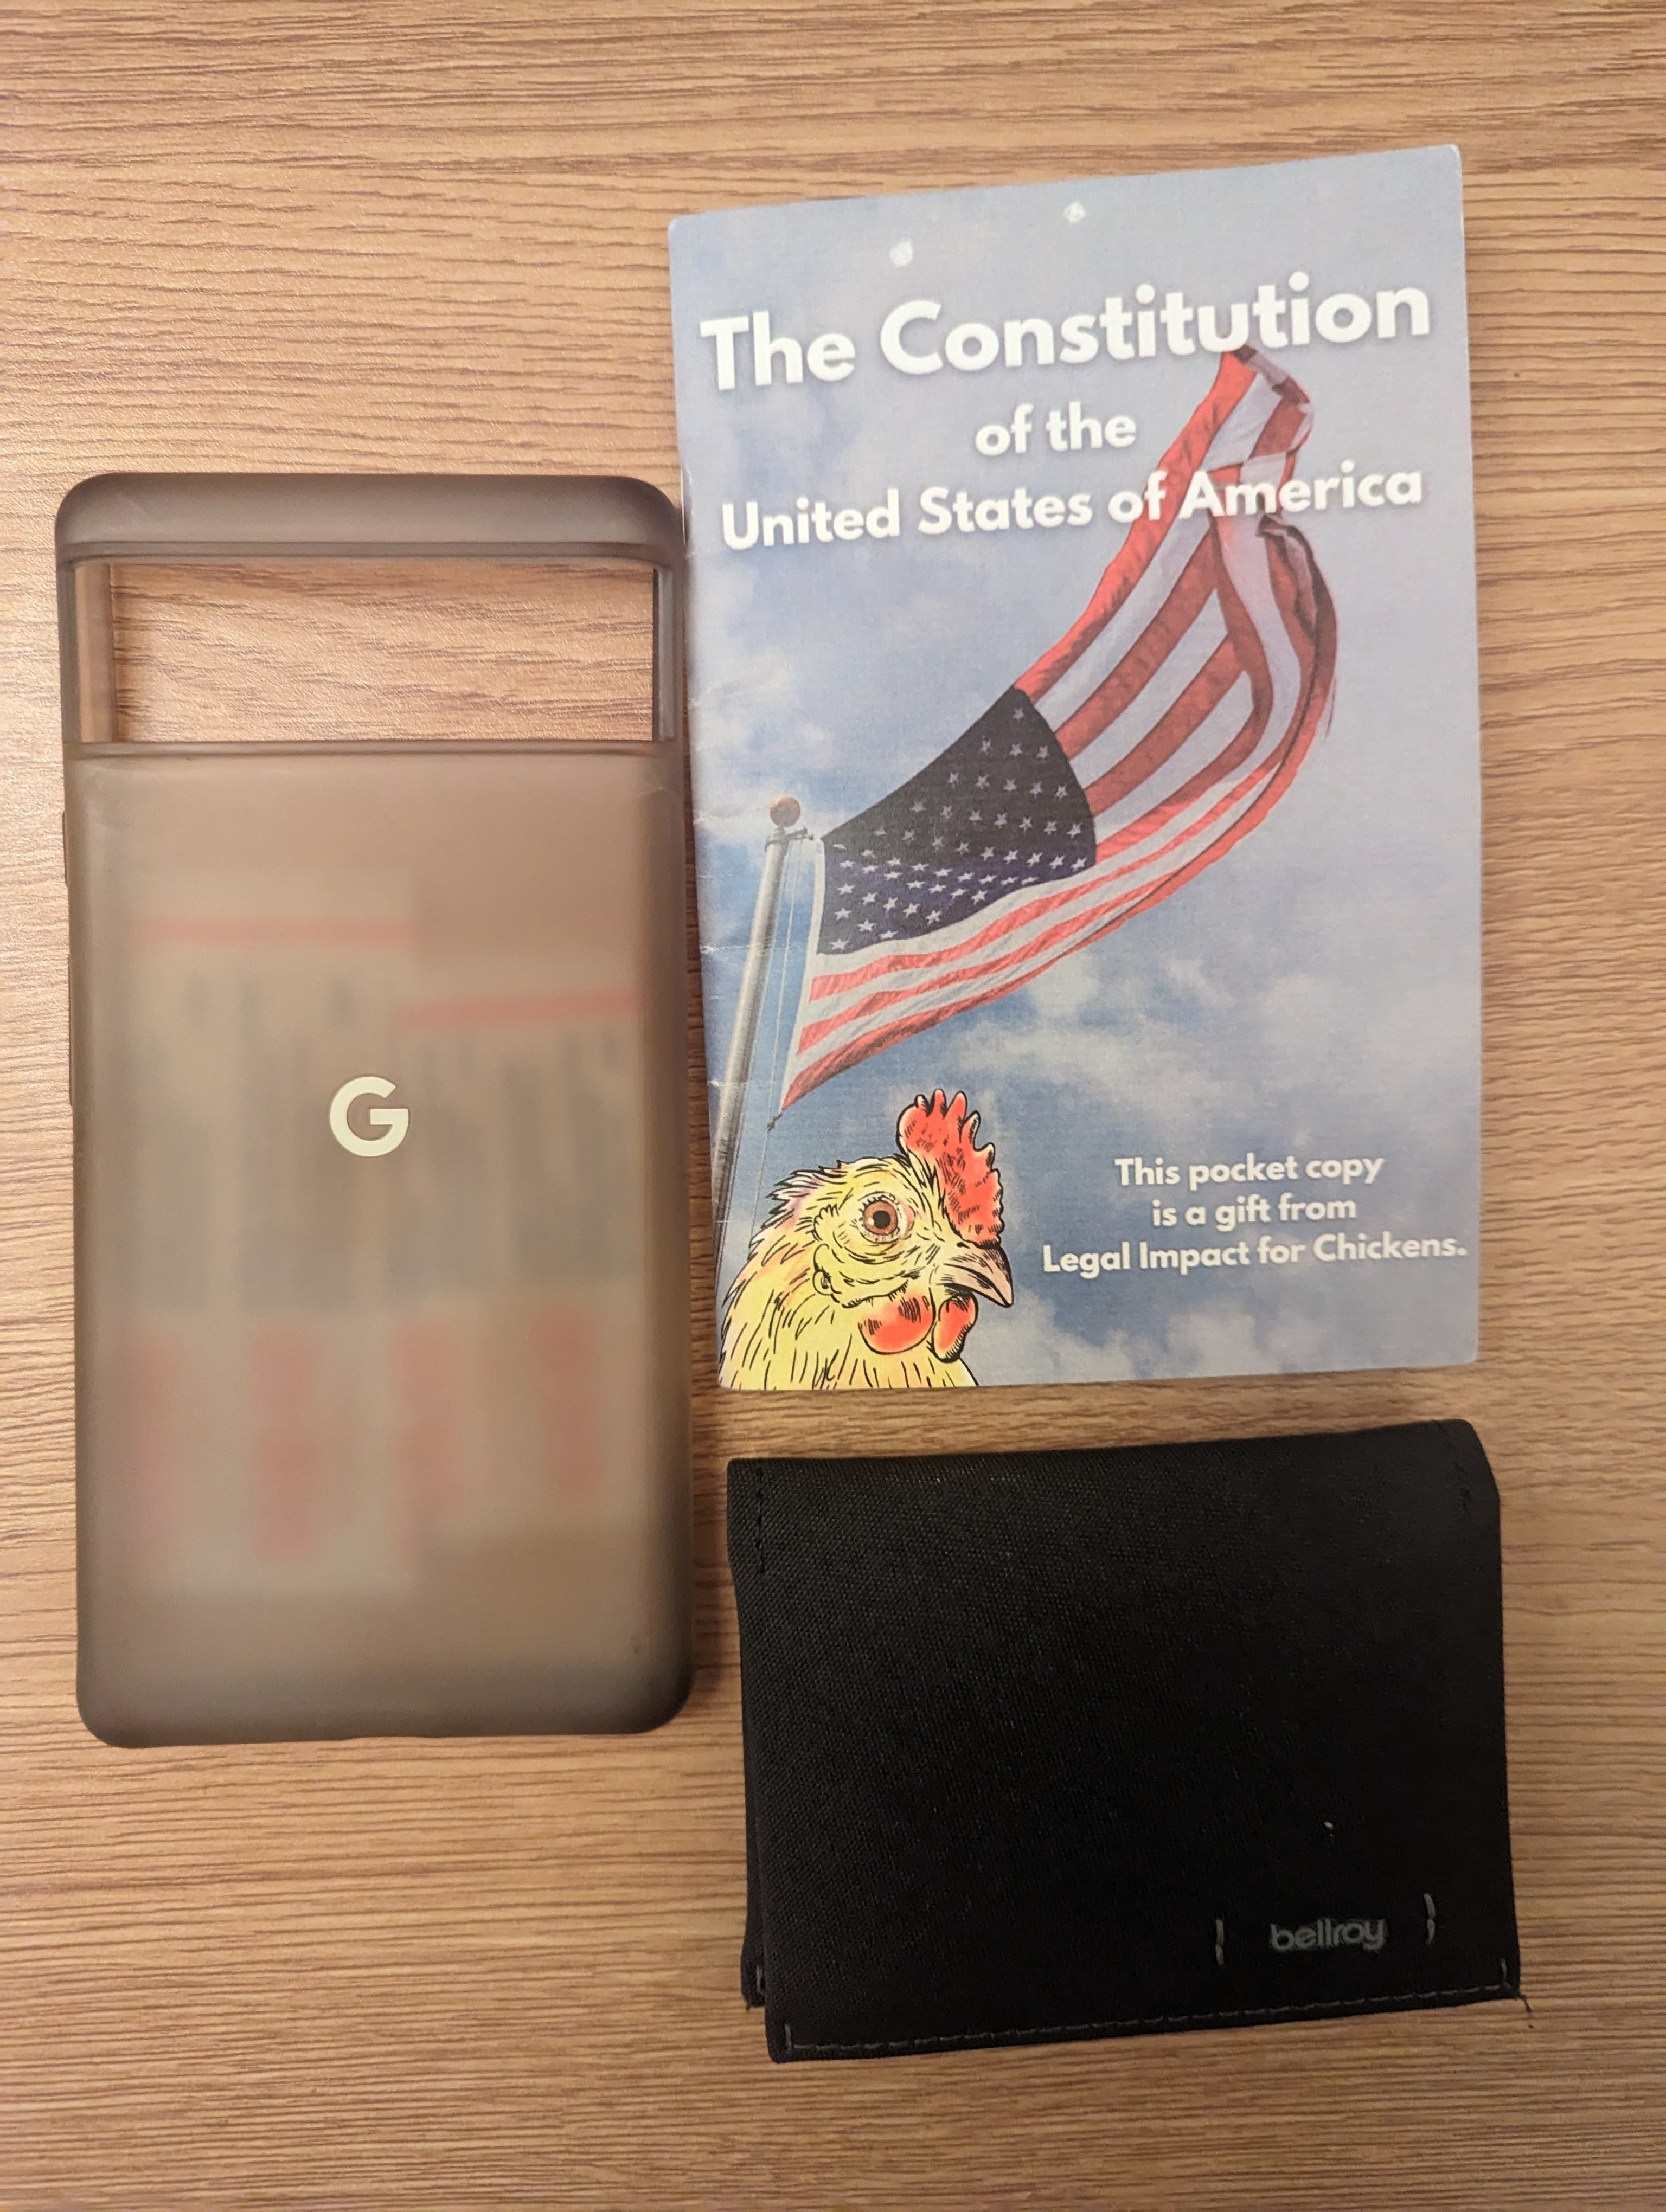 Pocket items: pocket constitution, phone case, and wallet